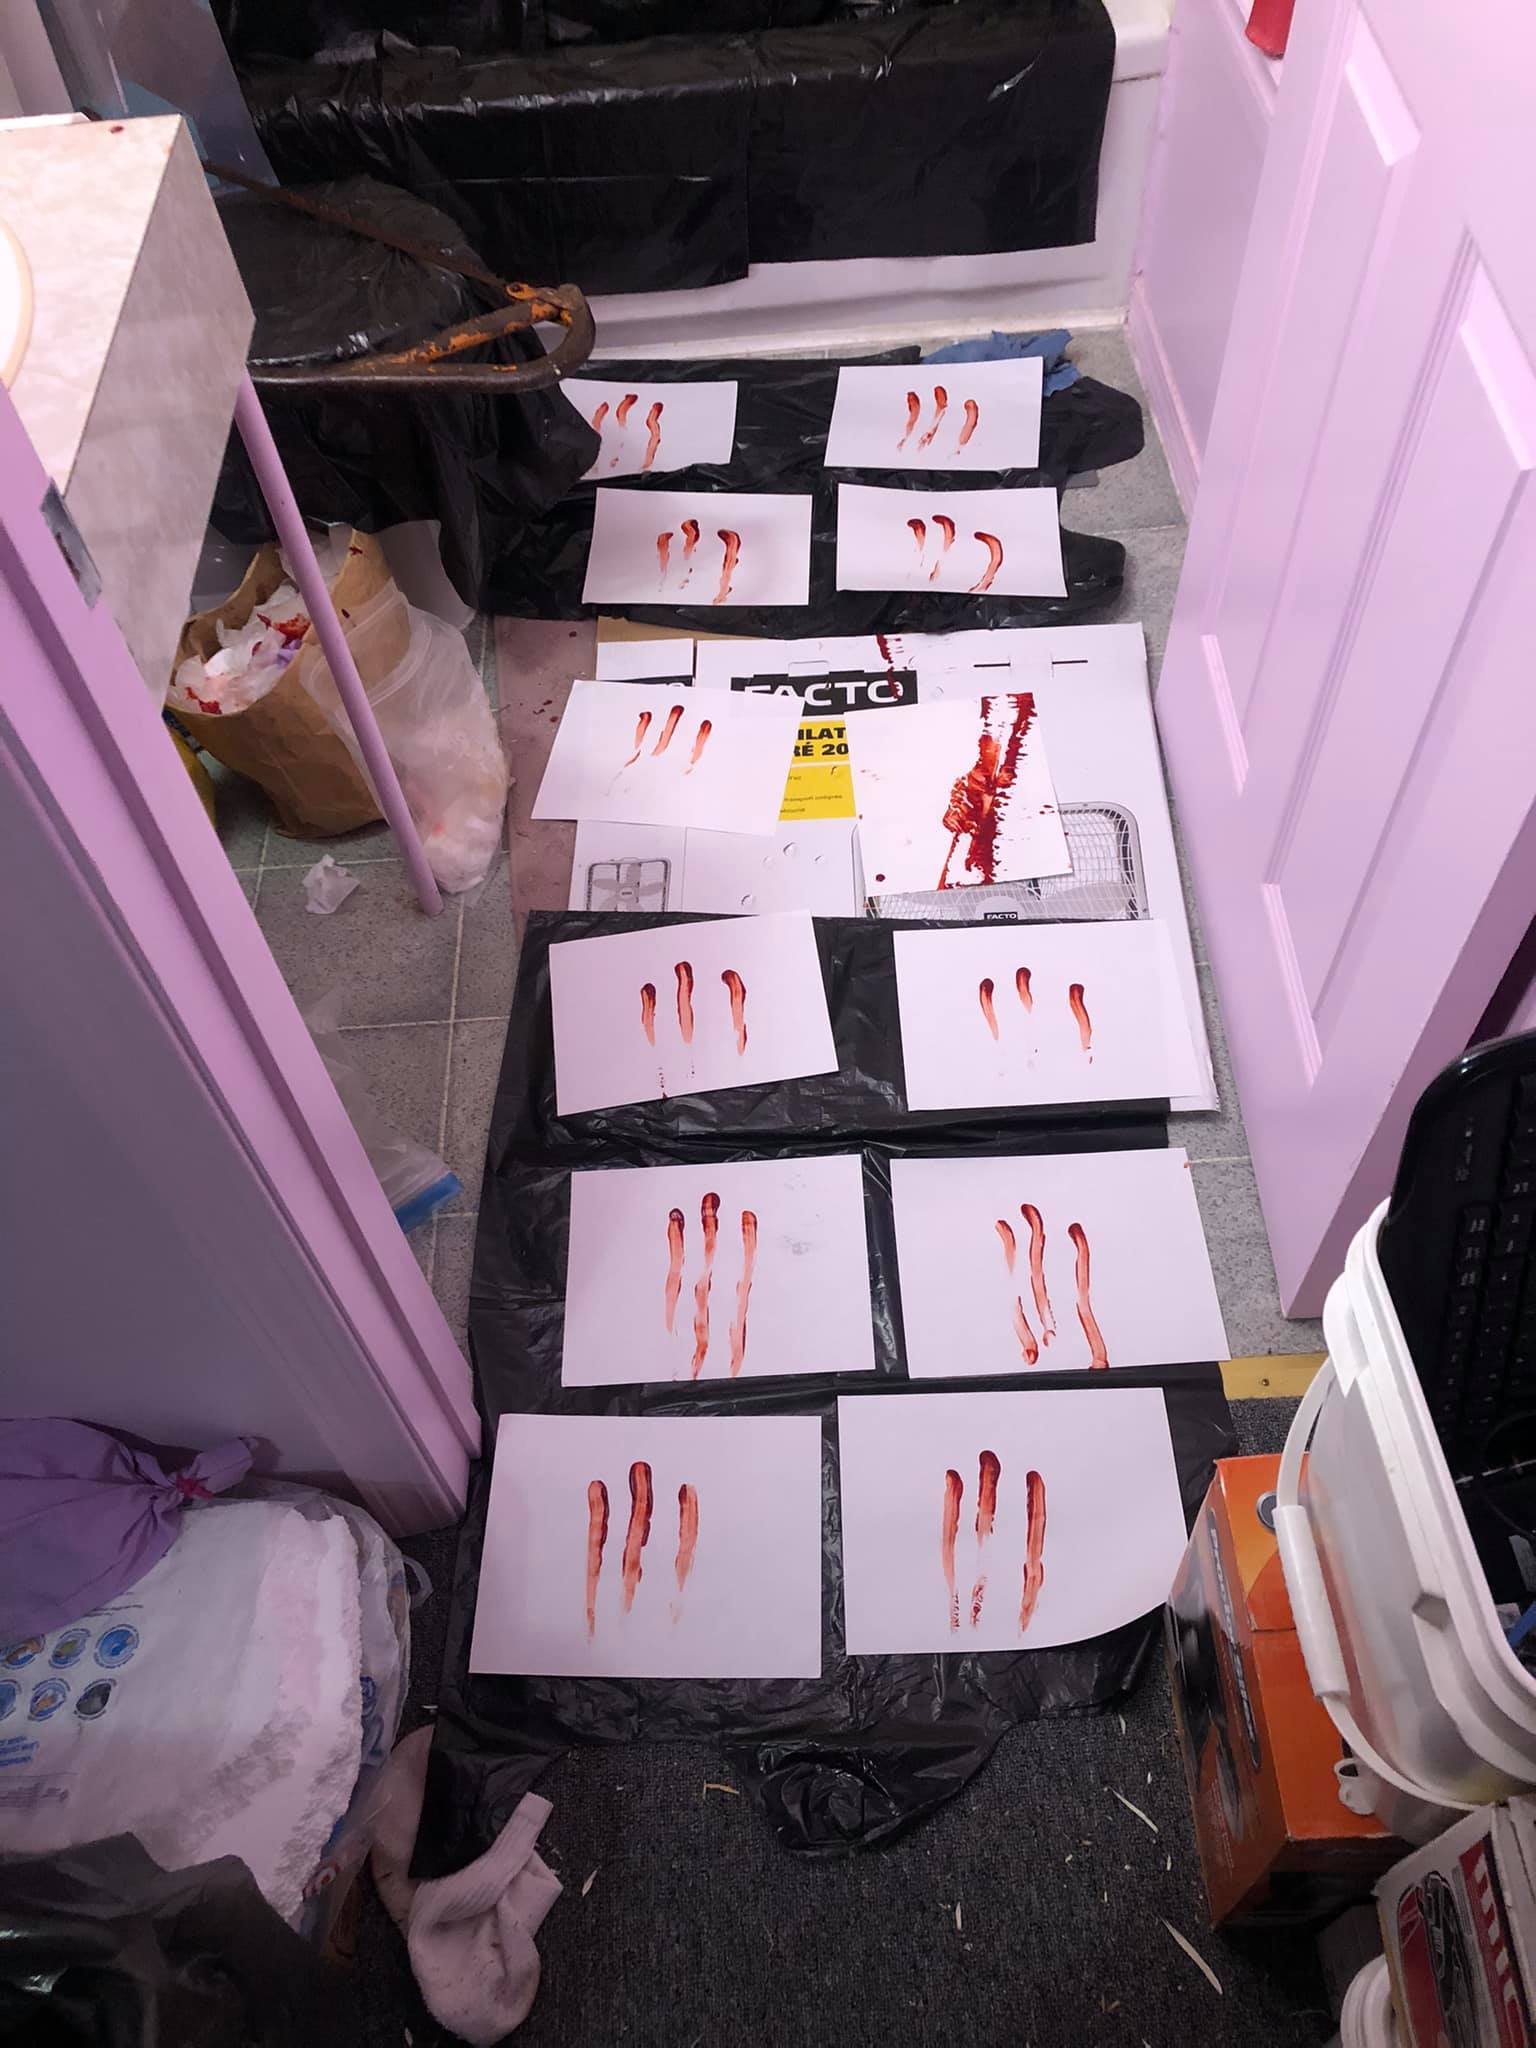 There are twelve canvases here, all laid out in two rows. Most of them have three streaks of blood down them, while one is a snarled looking mess of red.